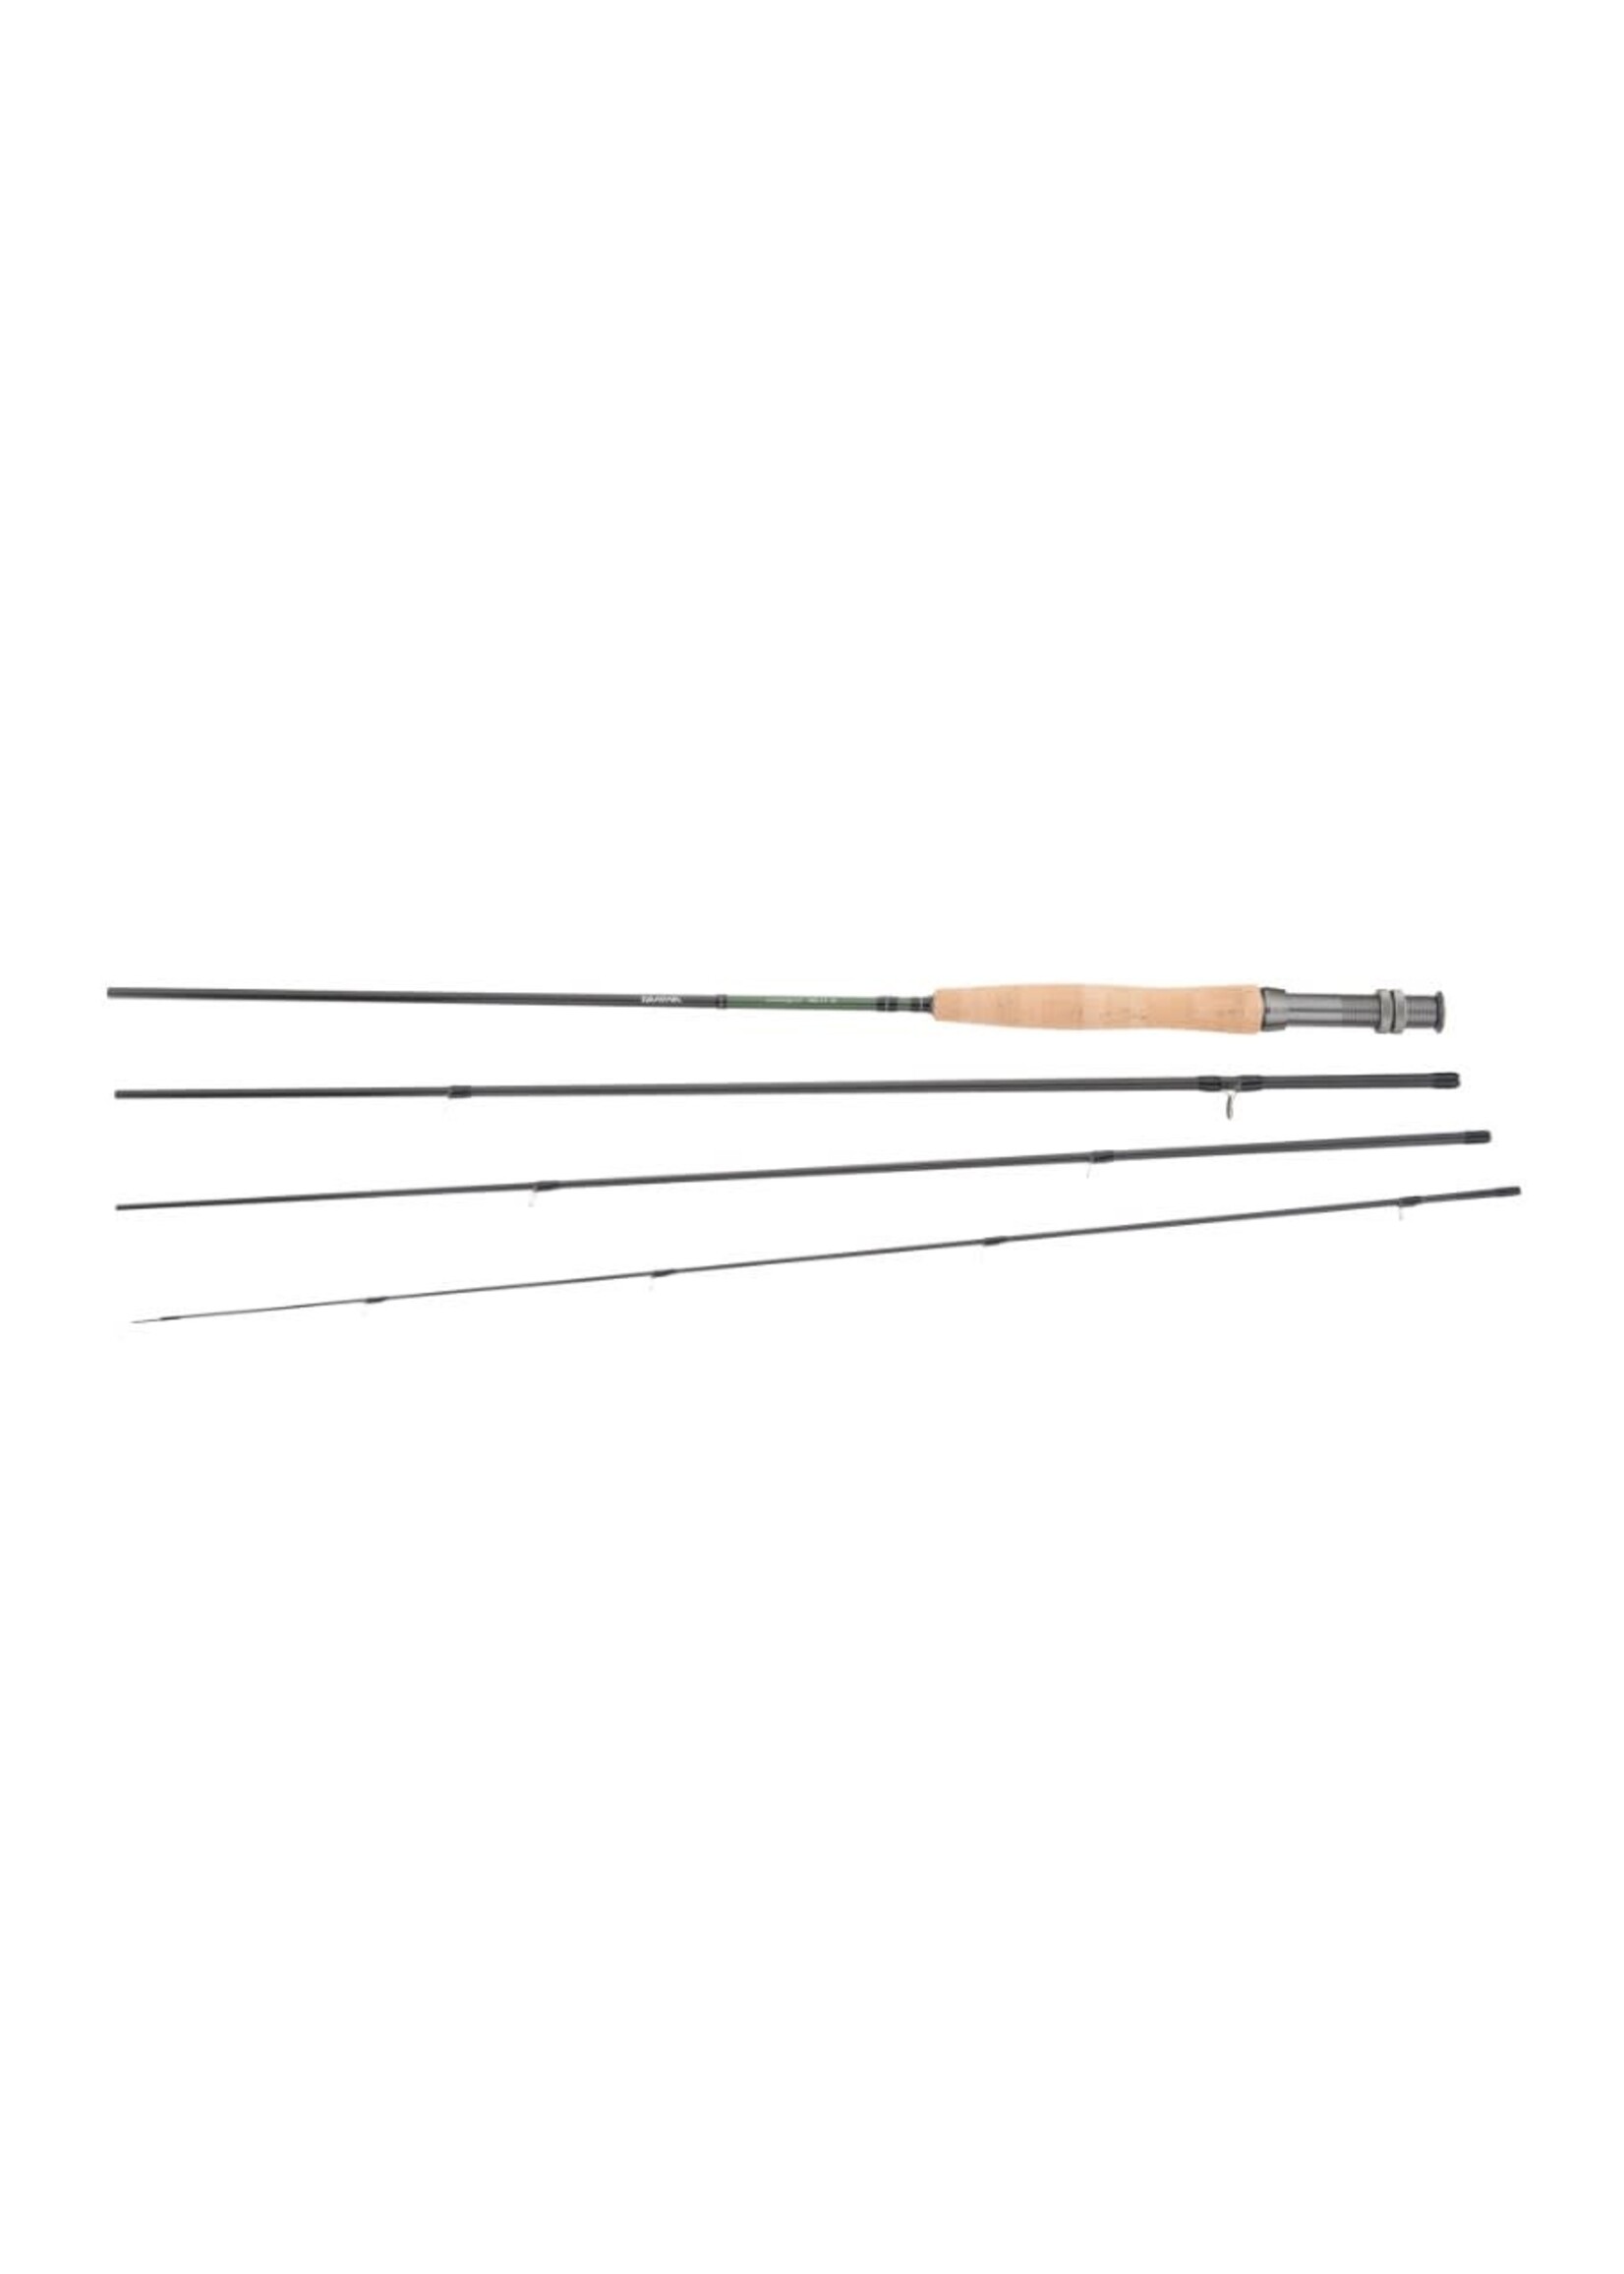 Daiwa Algonquin Fly Rod with Carry Case 9'